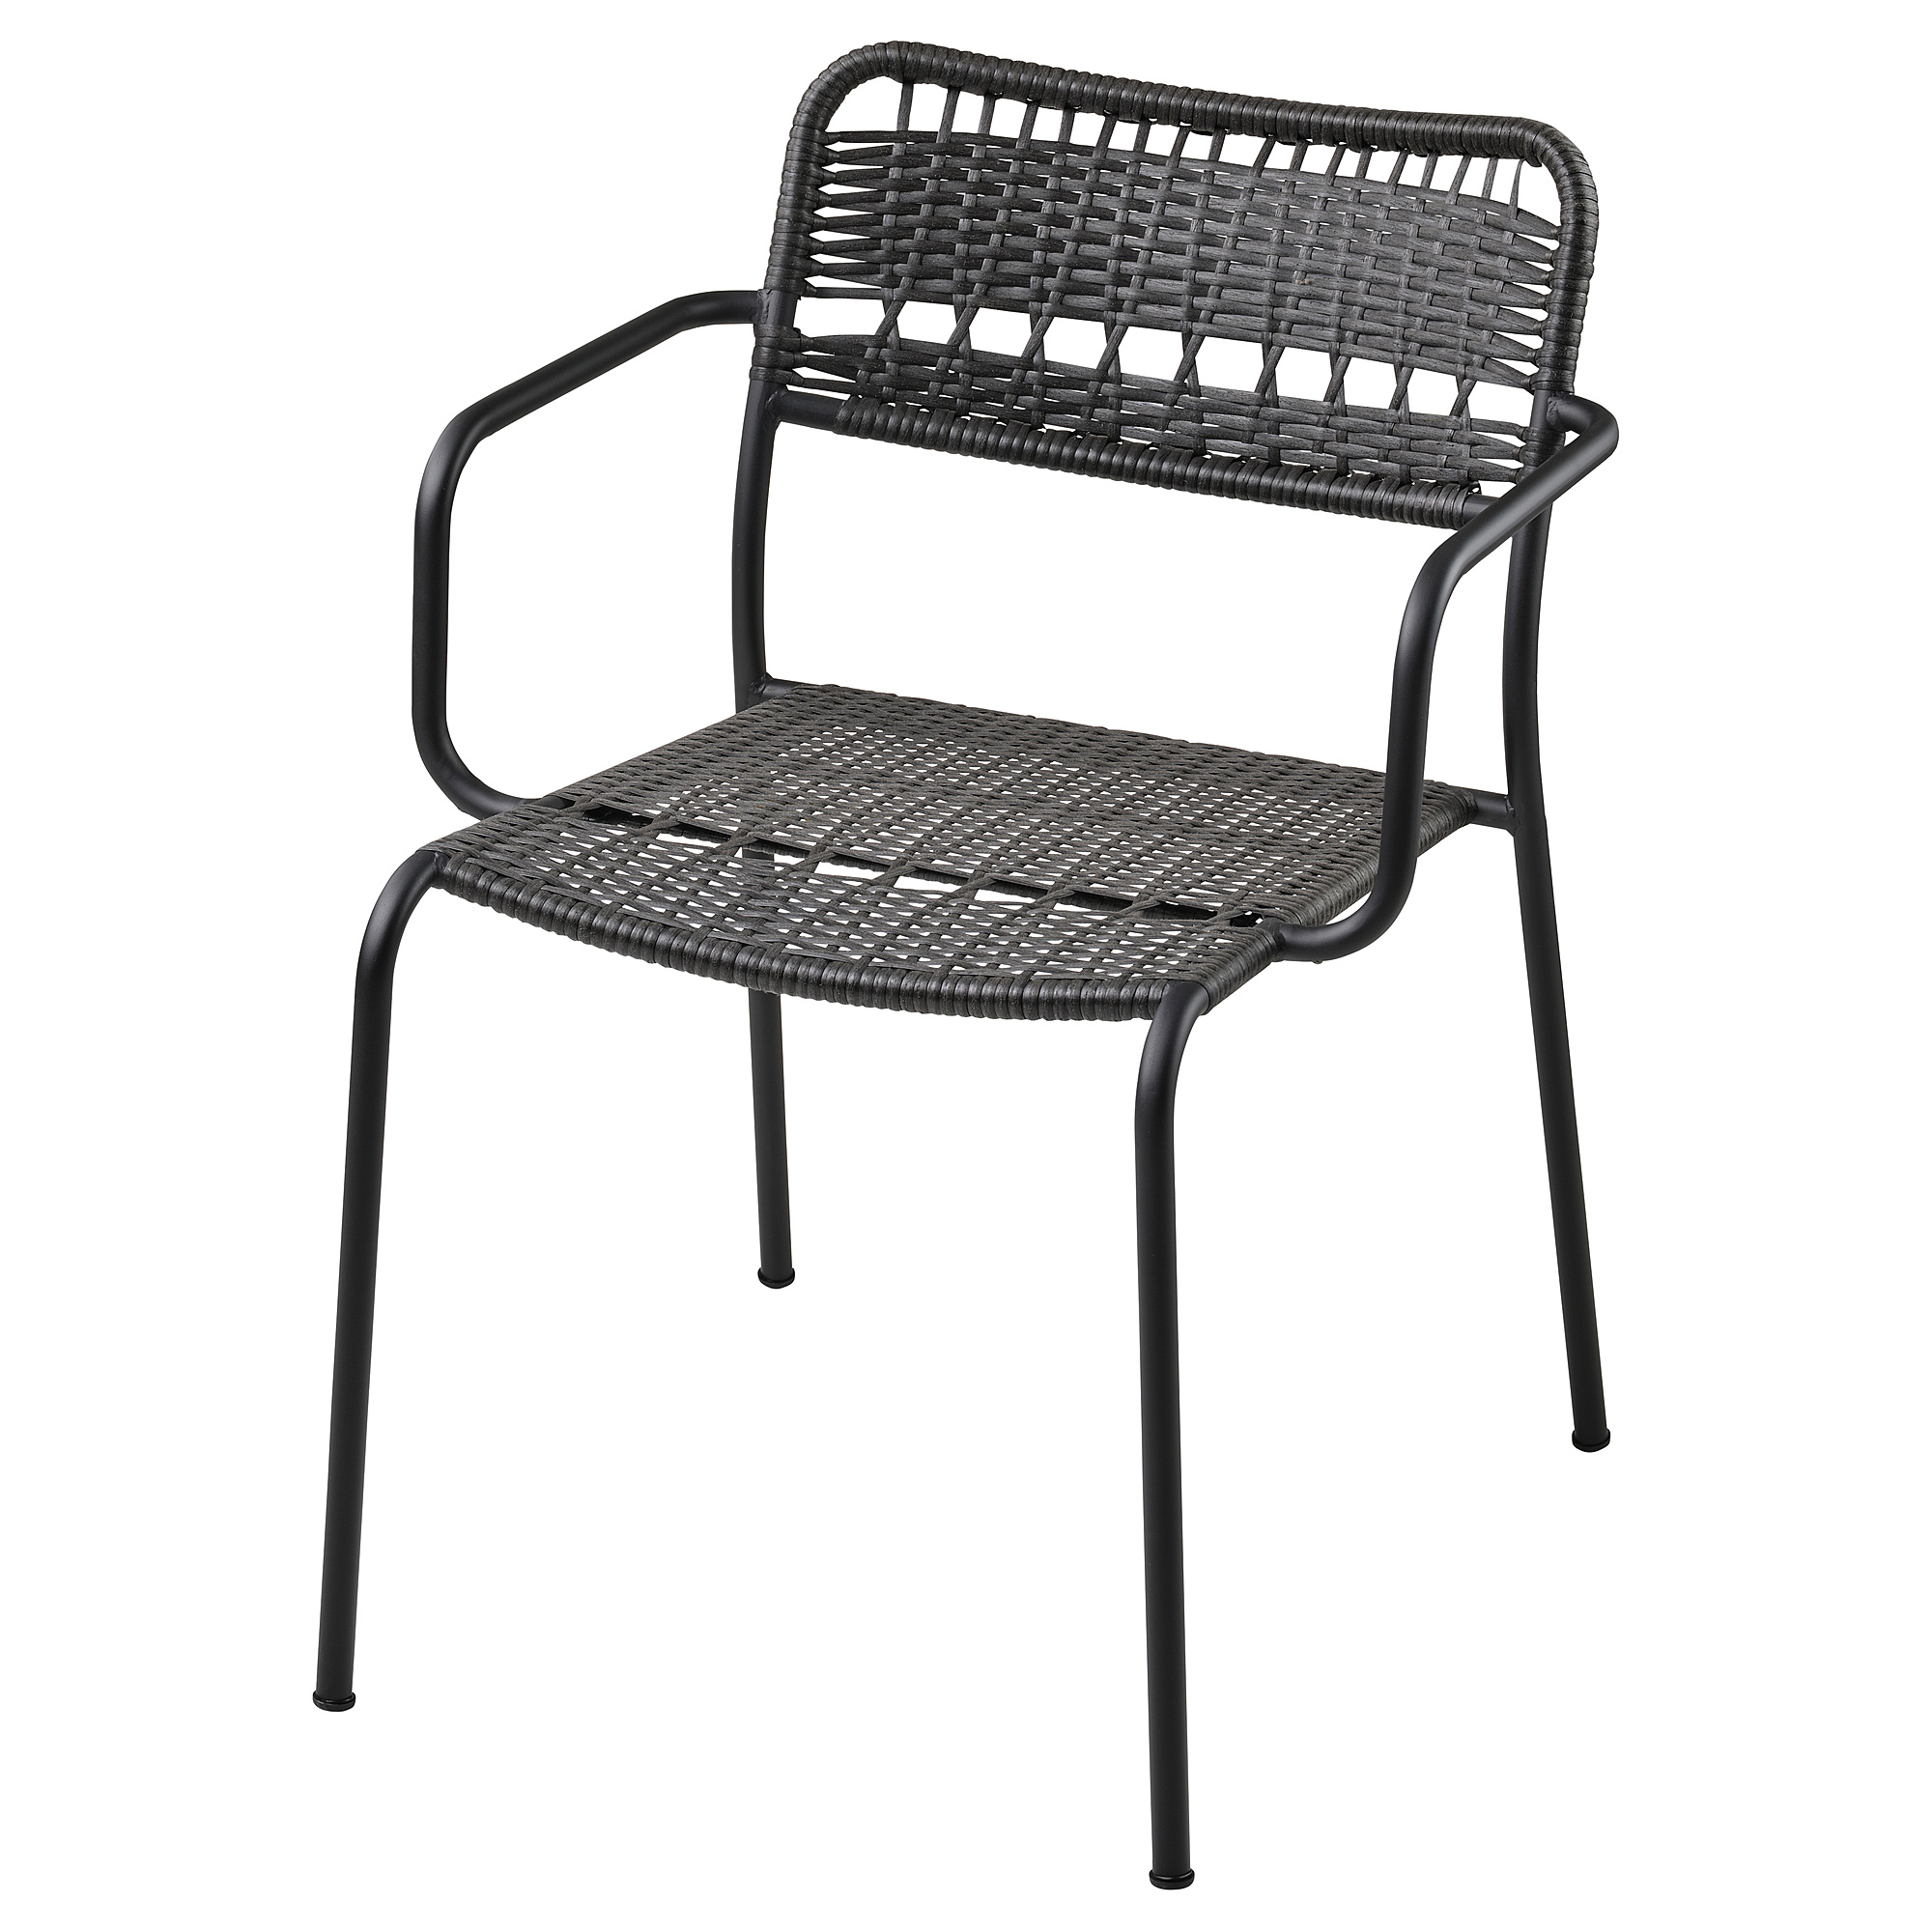 LÄCKÖ chair with armrests, outdoor